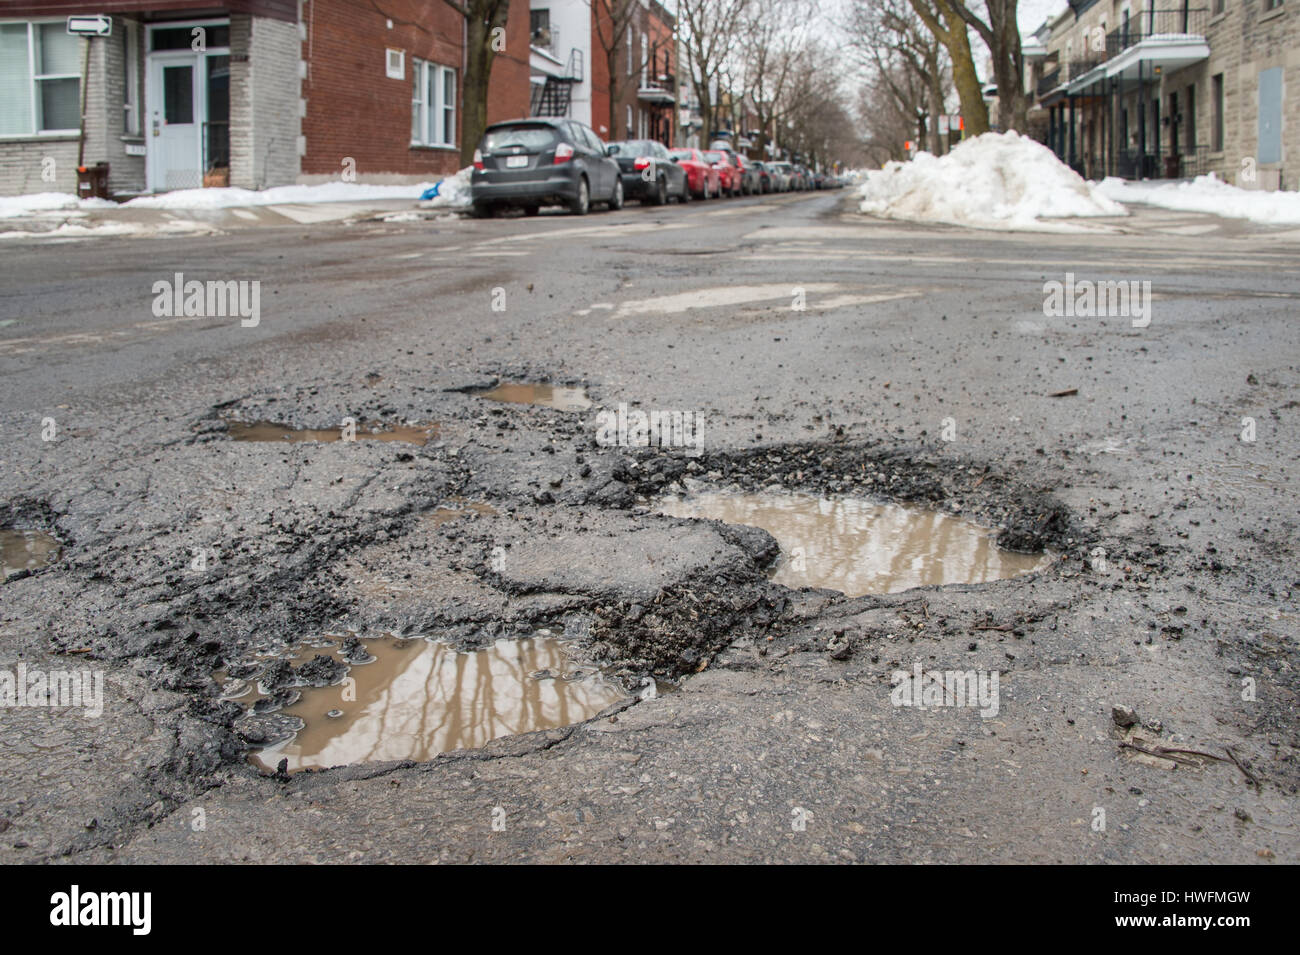 Montreal, Canada - 20 March 2017: Several large potholes on Bienville Street Stock Photo